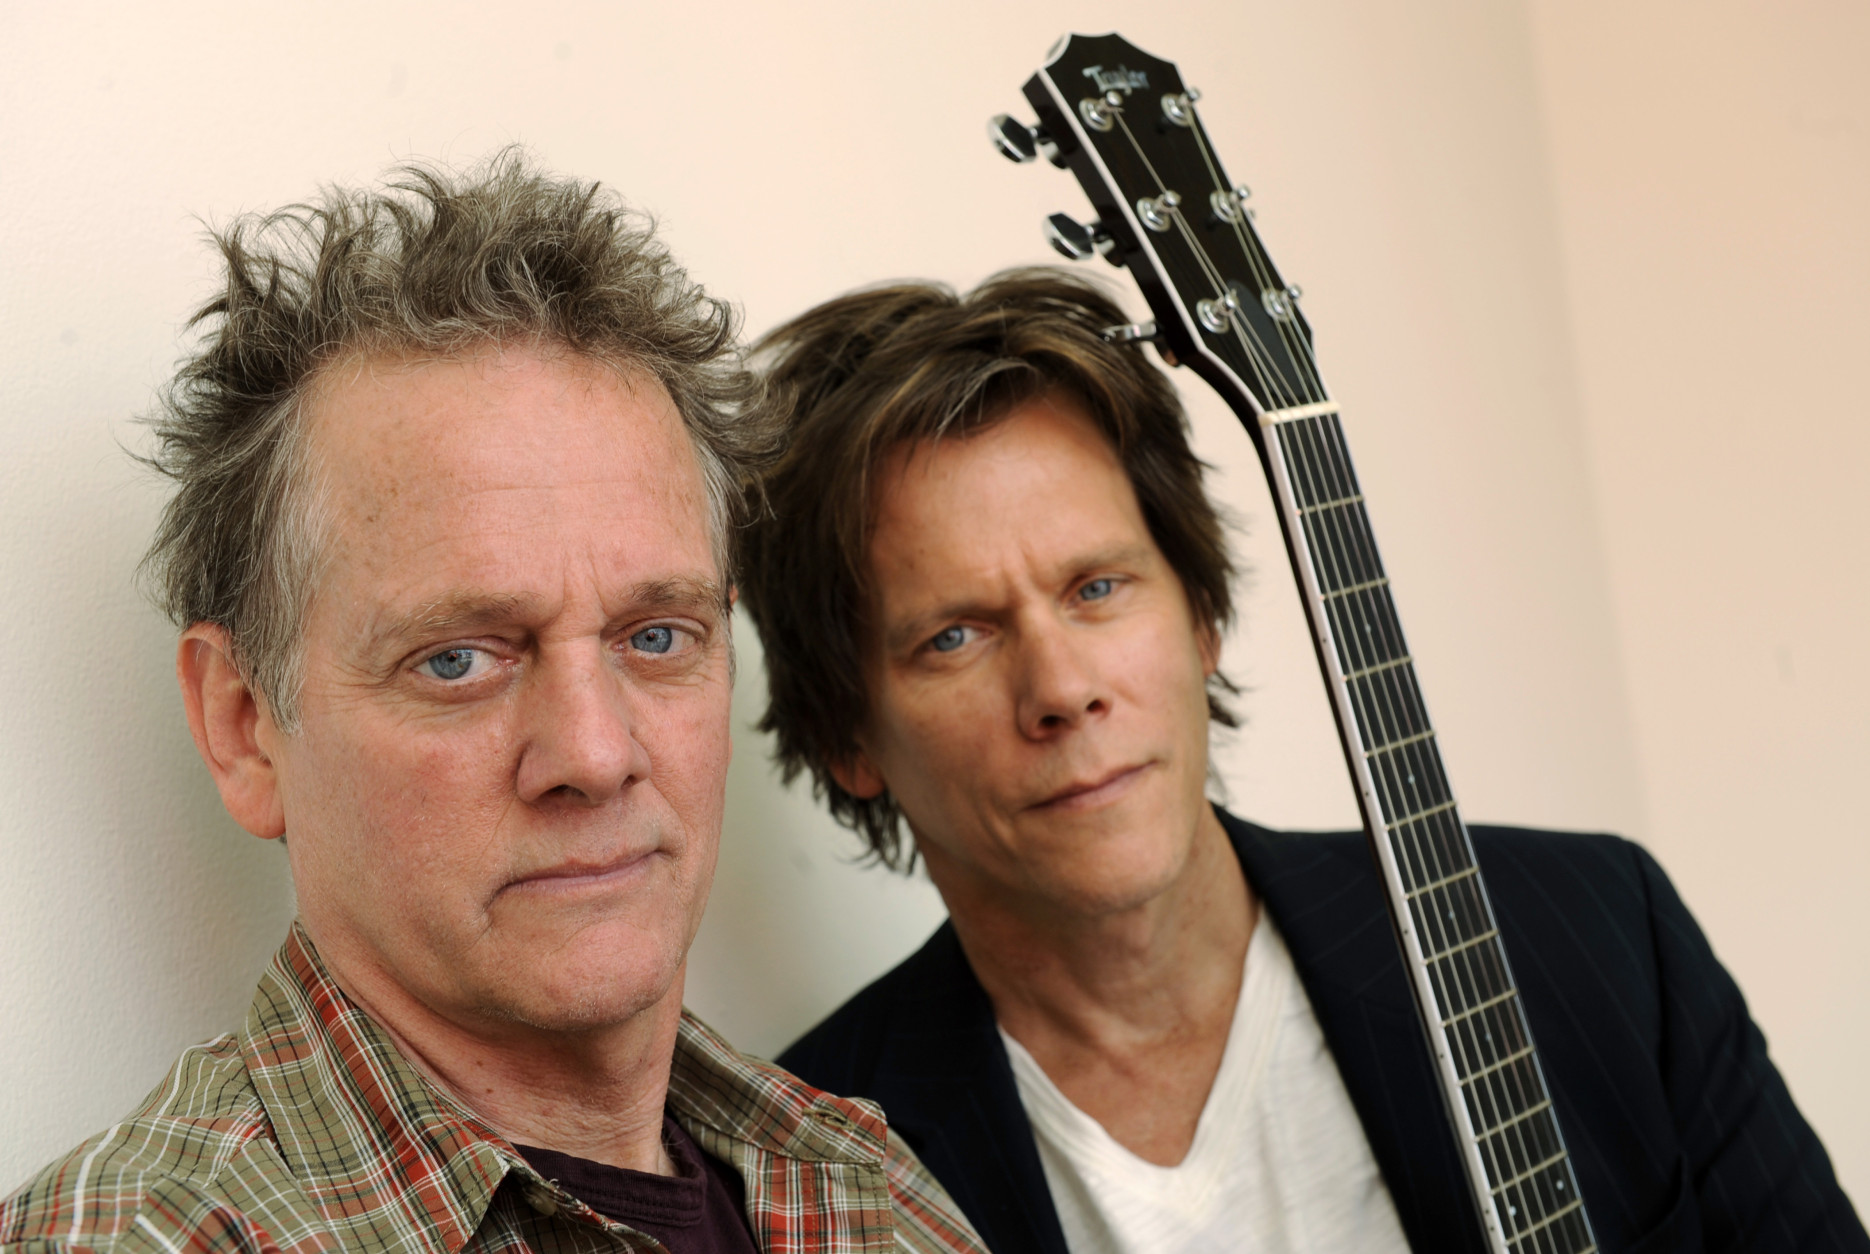 Michael Bacon, left, and Kevin Bacon of The Bacon Brothers band pose for a portrait in Los Angeles, Wednesday, March 25, 2009. (AP Photo/Chris Pizzello)